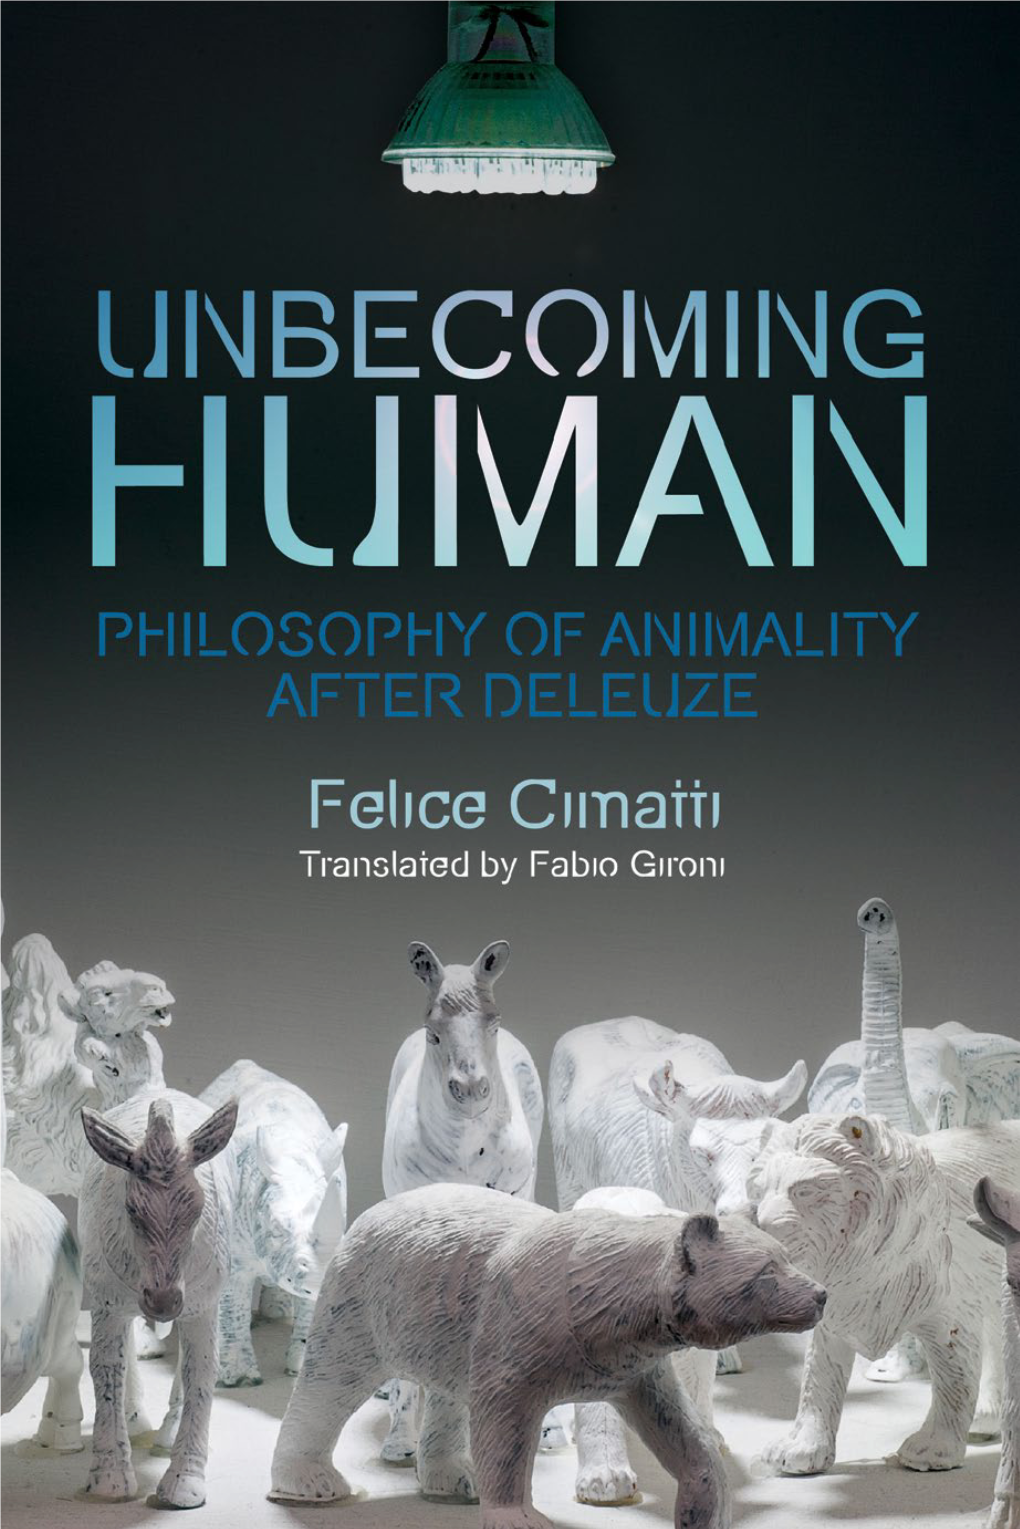 UNBECOMING HUMAN Philosophy of Animality After Deleuze